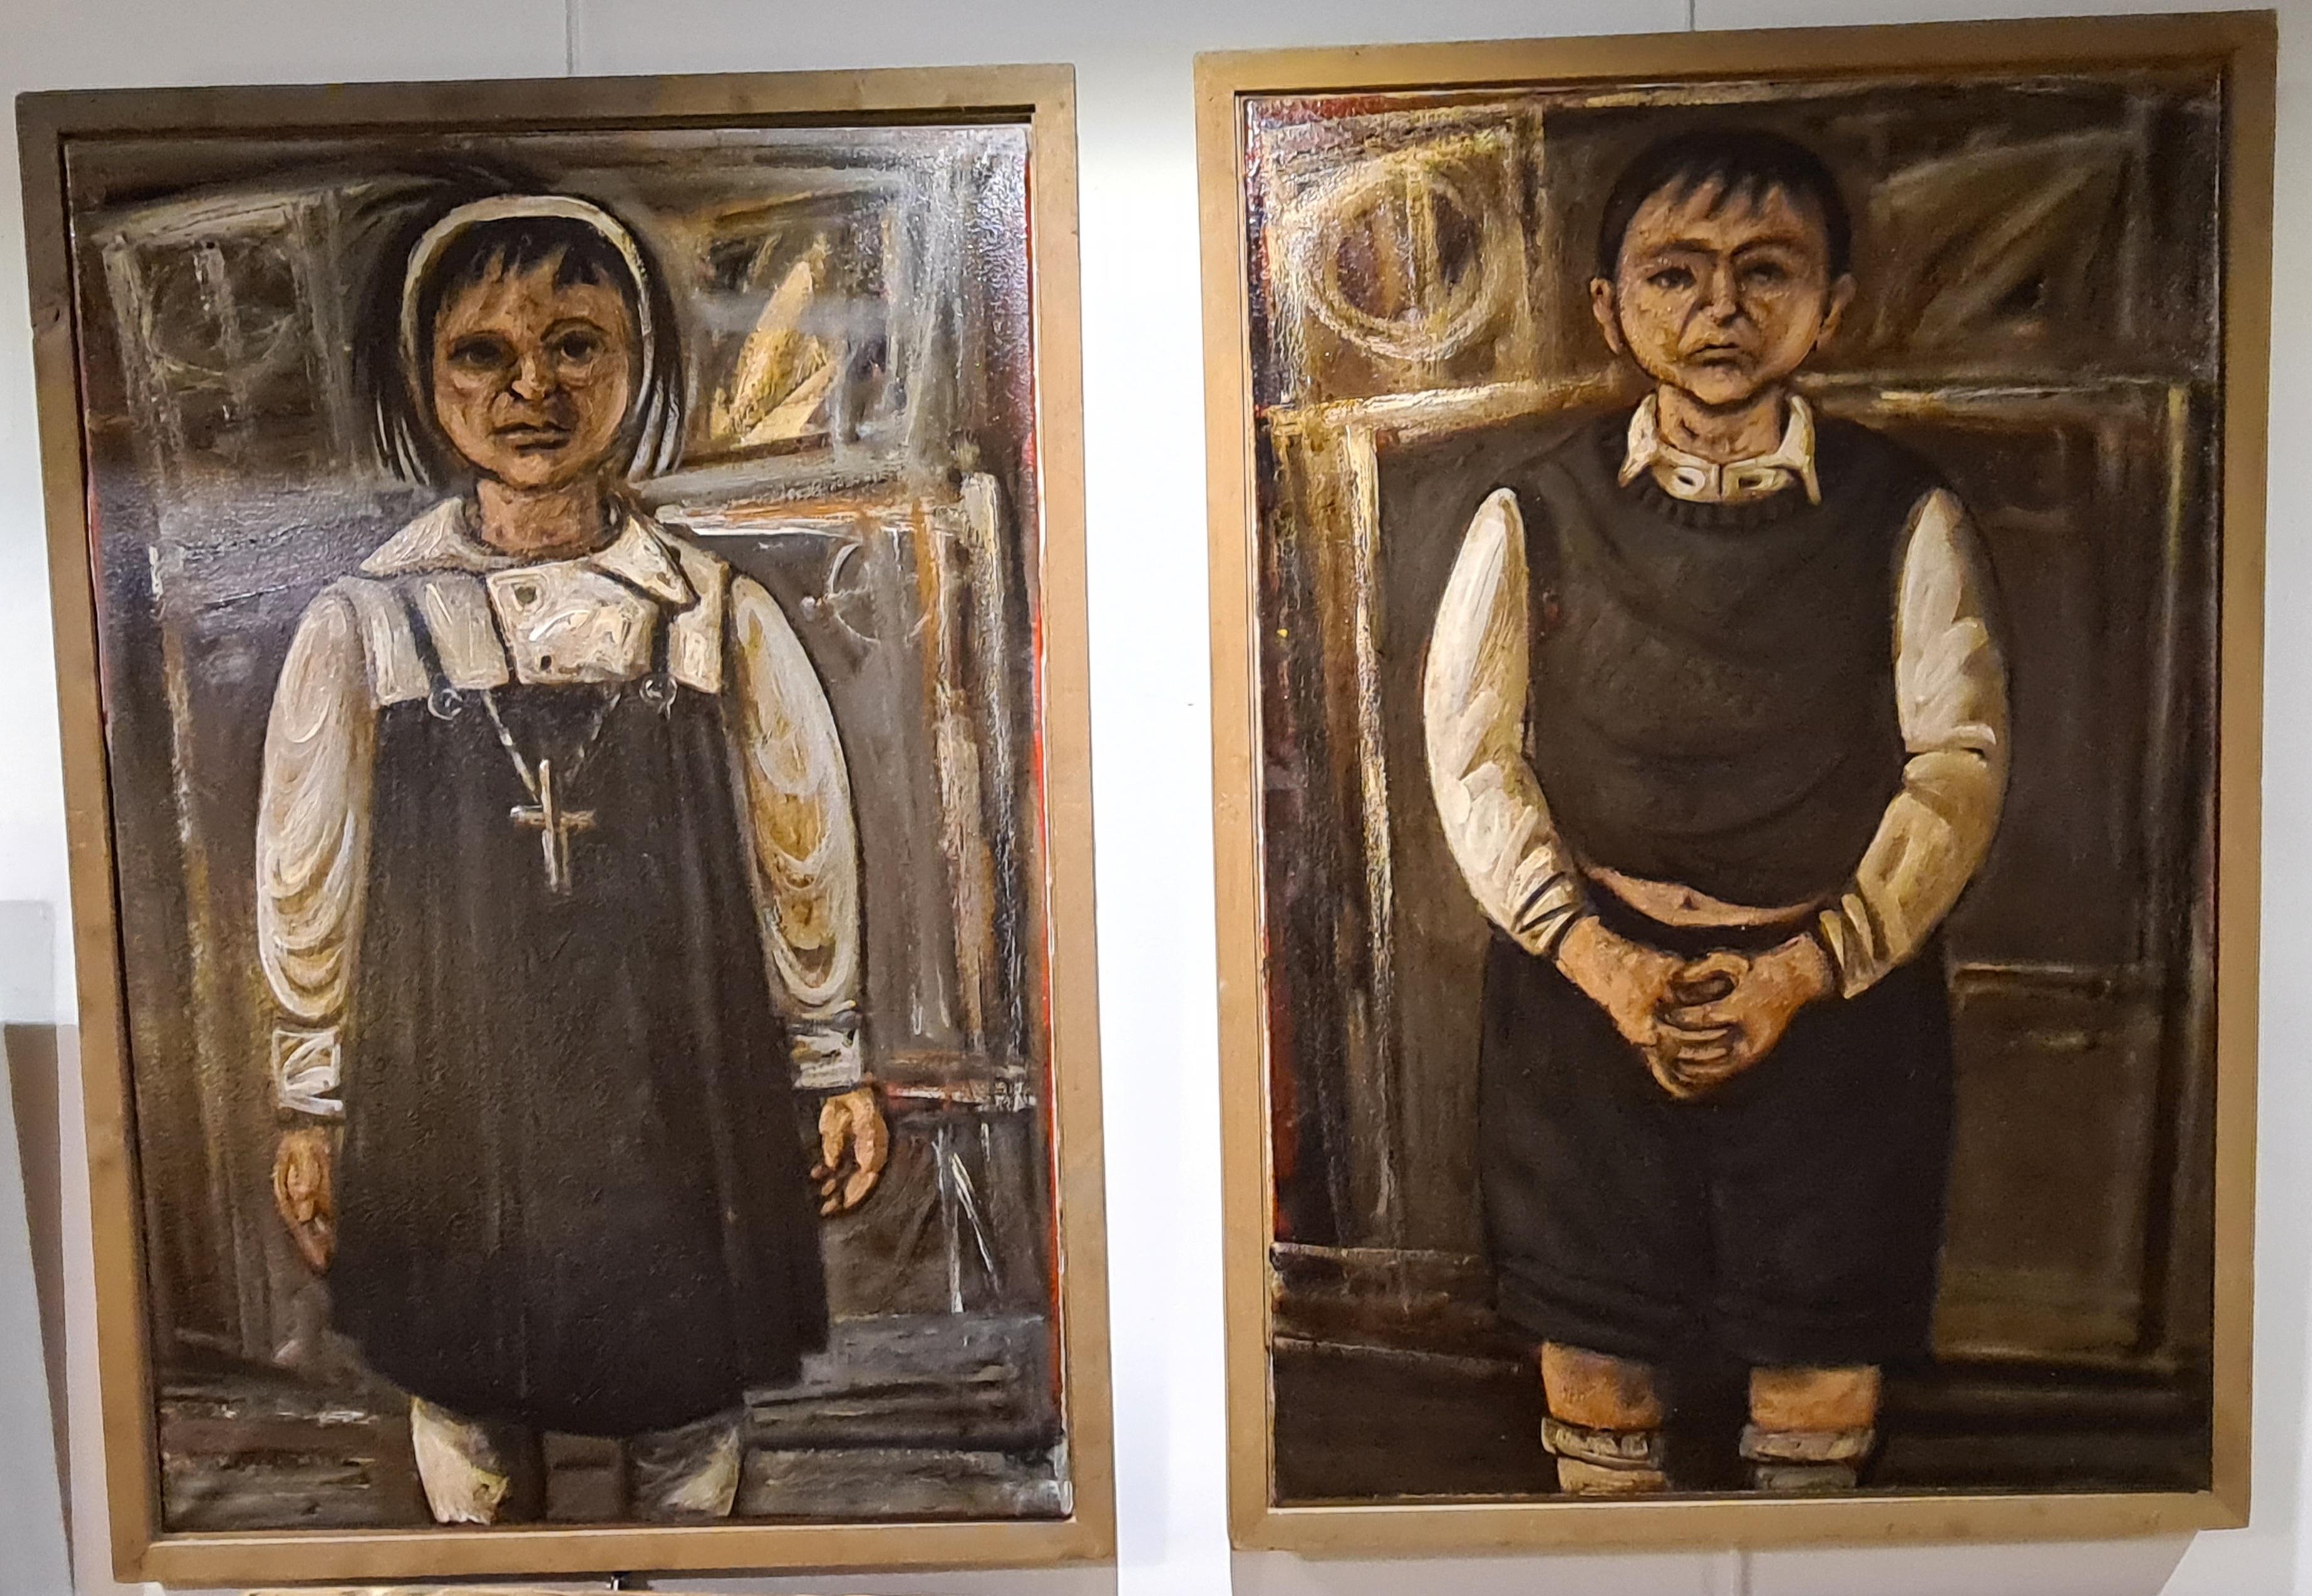  Stuart Mackenzie Figurative Painting - 'Him' and 'Her', A Pair of Large Glasgow School Portrait Paintings on Canvas